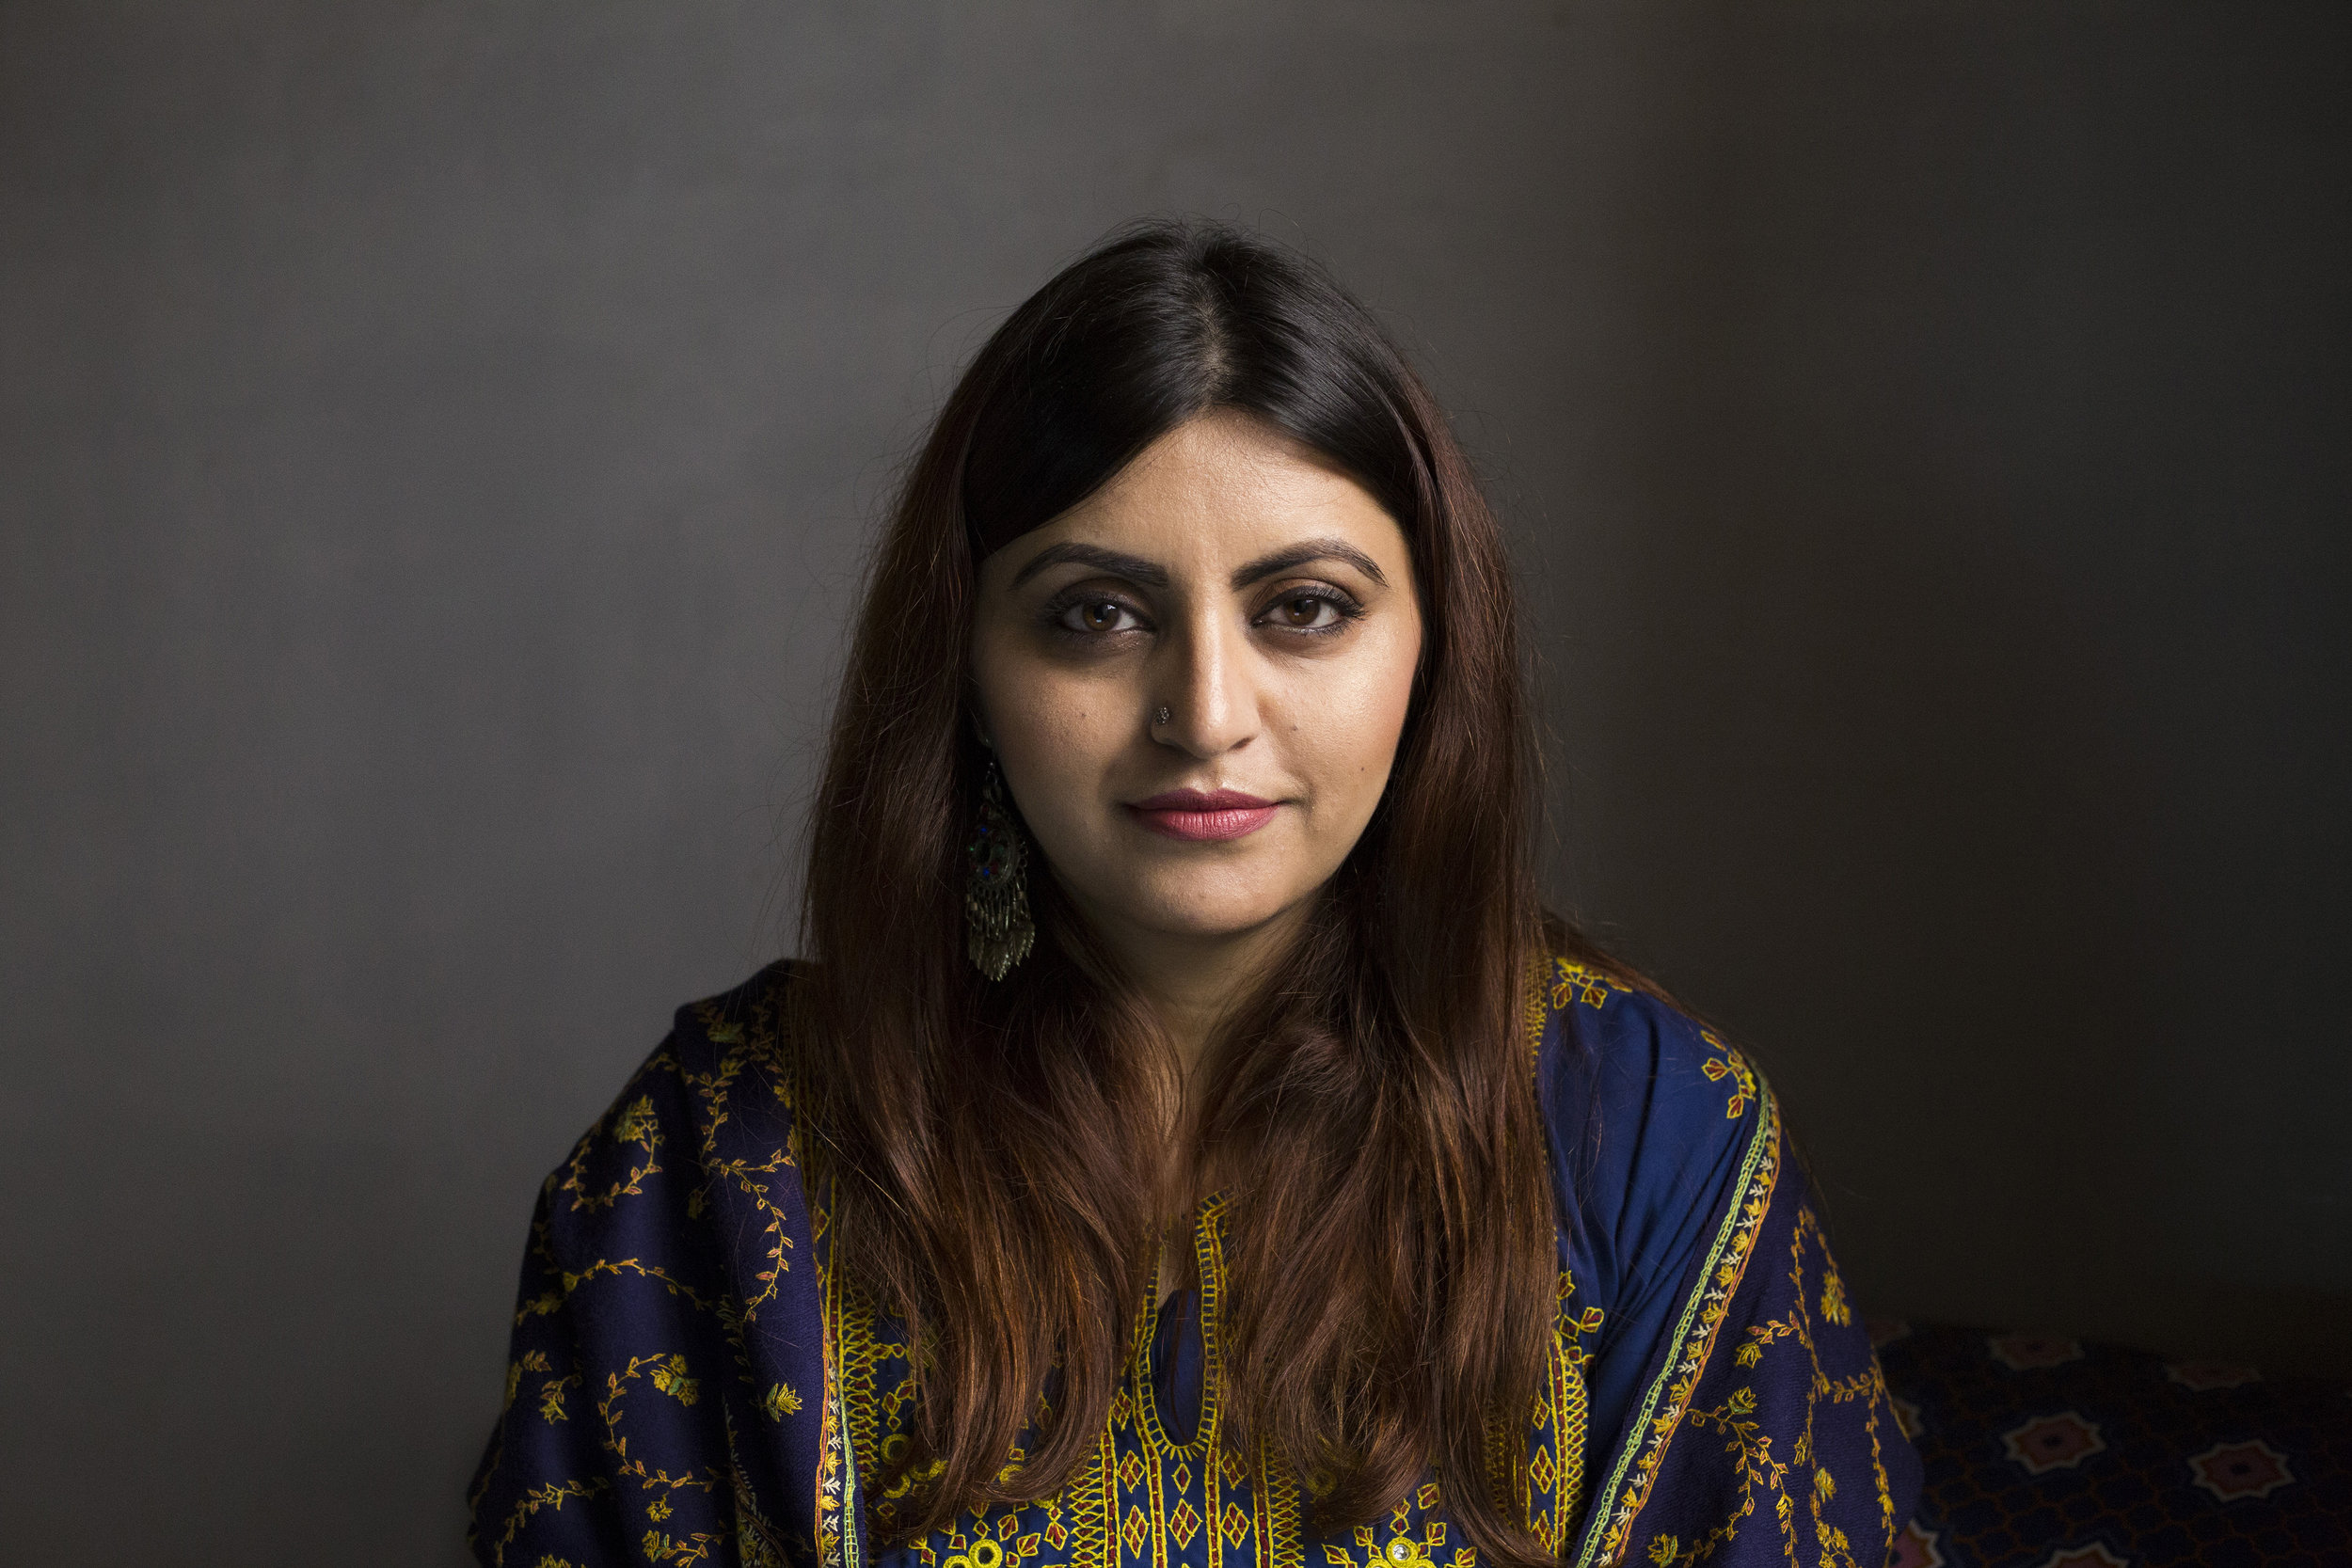  Gulalai Ismail, a human rights activist and chairperson of Aware Girls. 